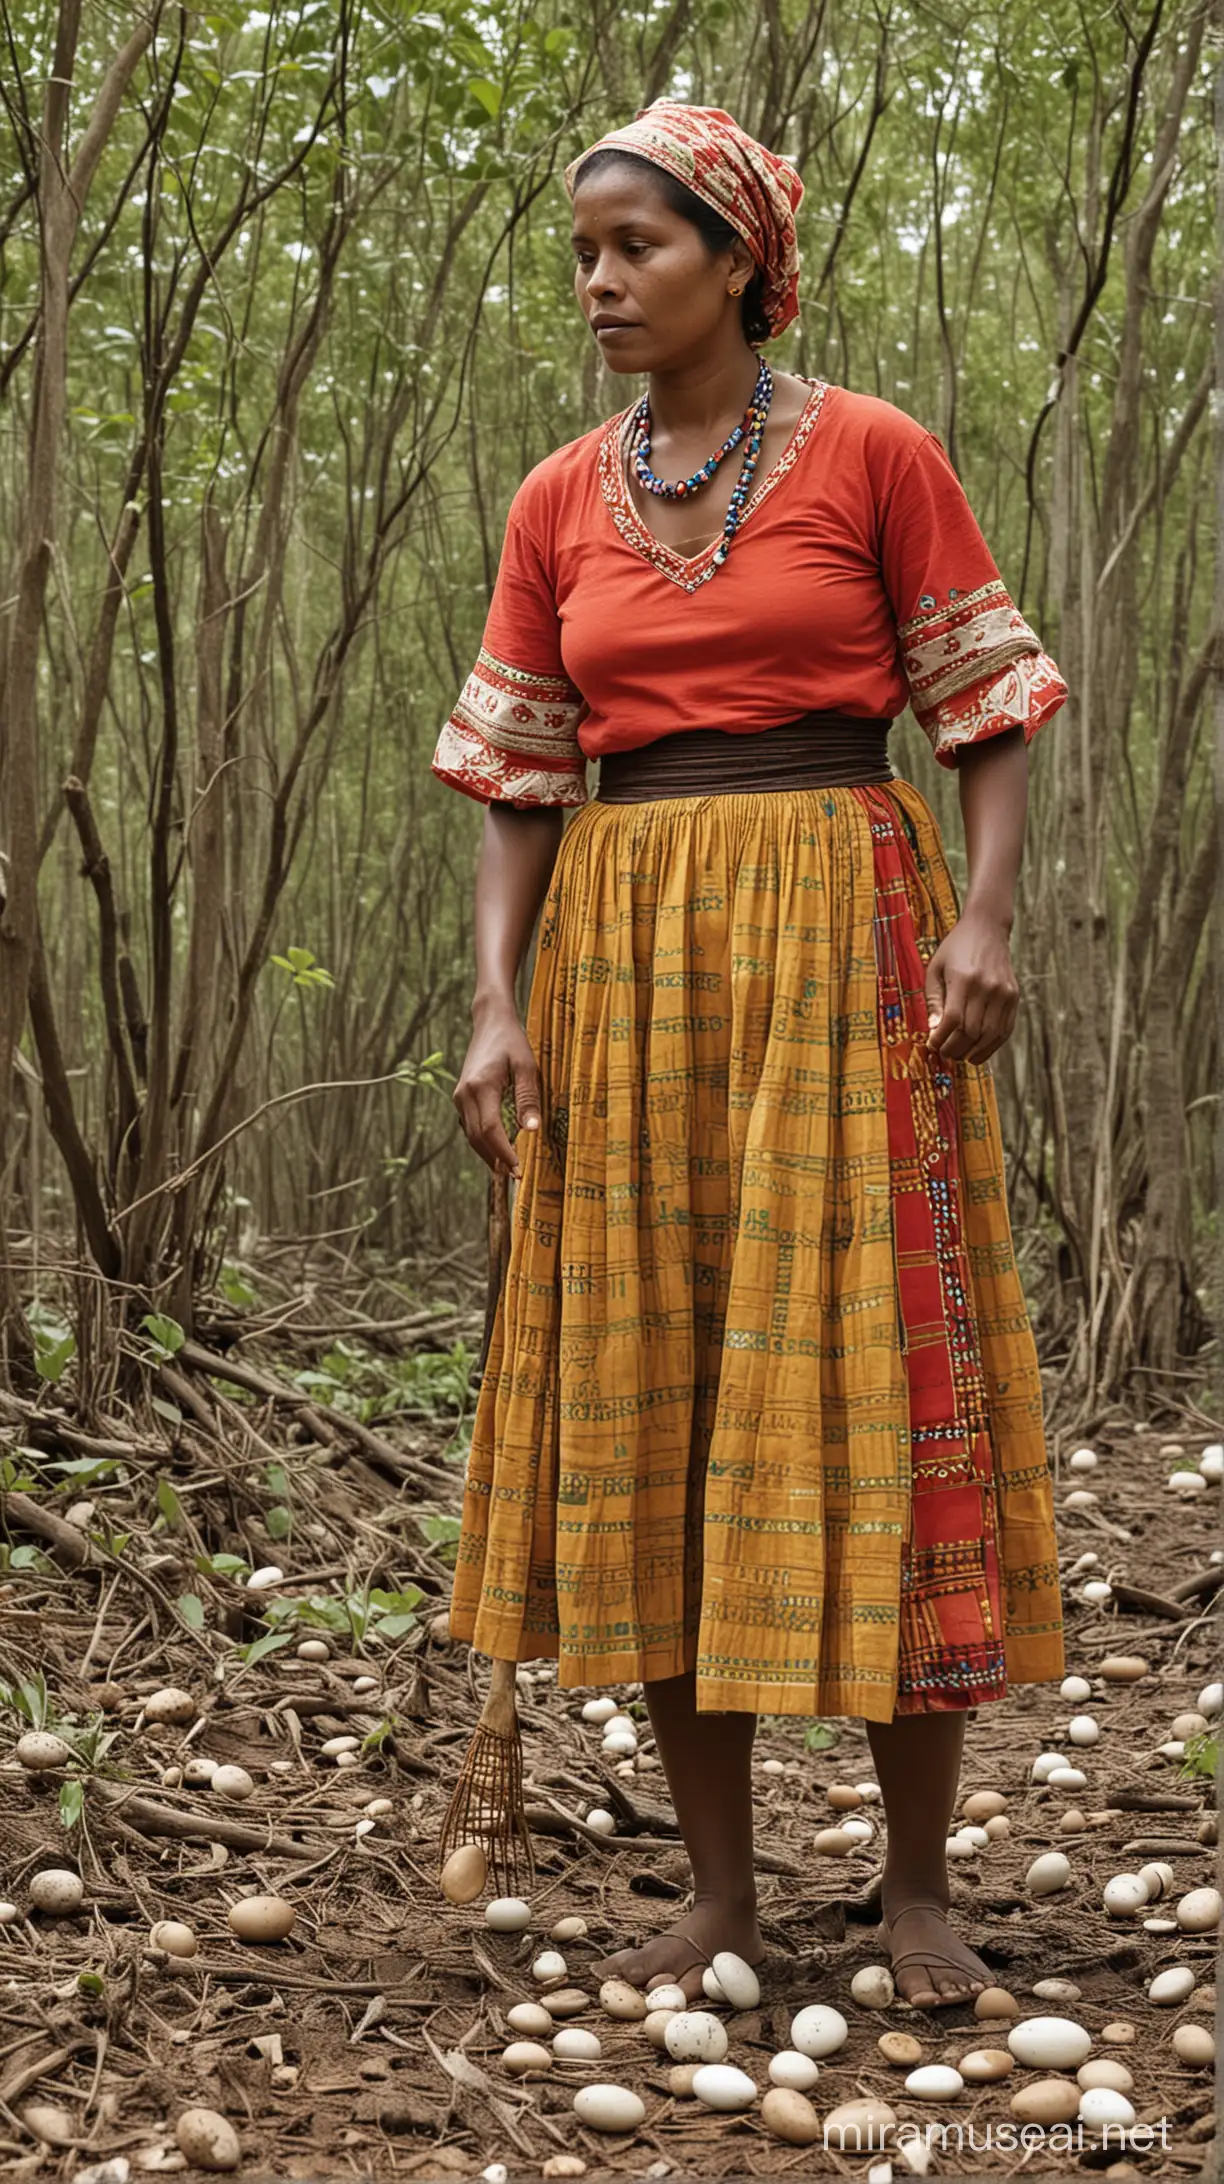 Mashco Piro Woman Gathering Turtle Eggs in Traditional Forest Hunt